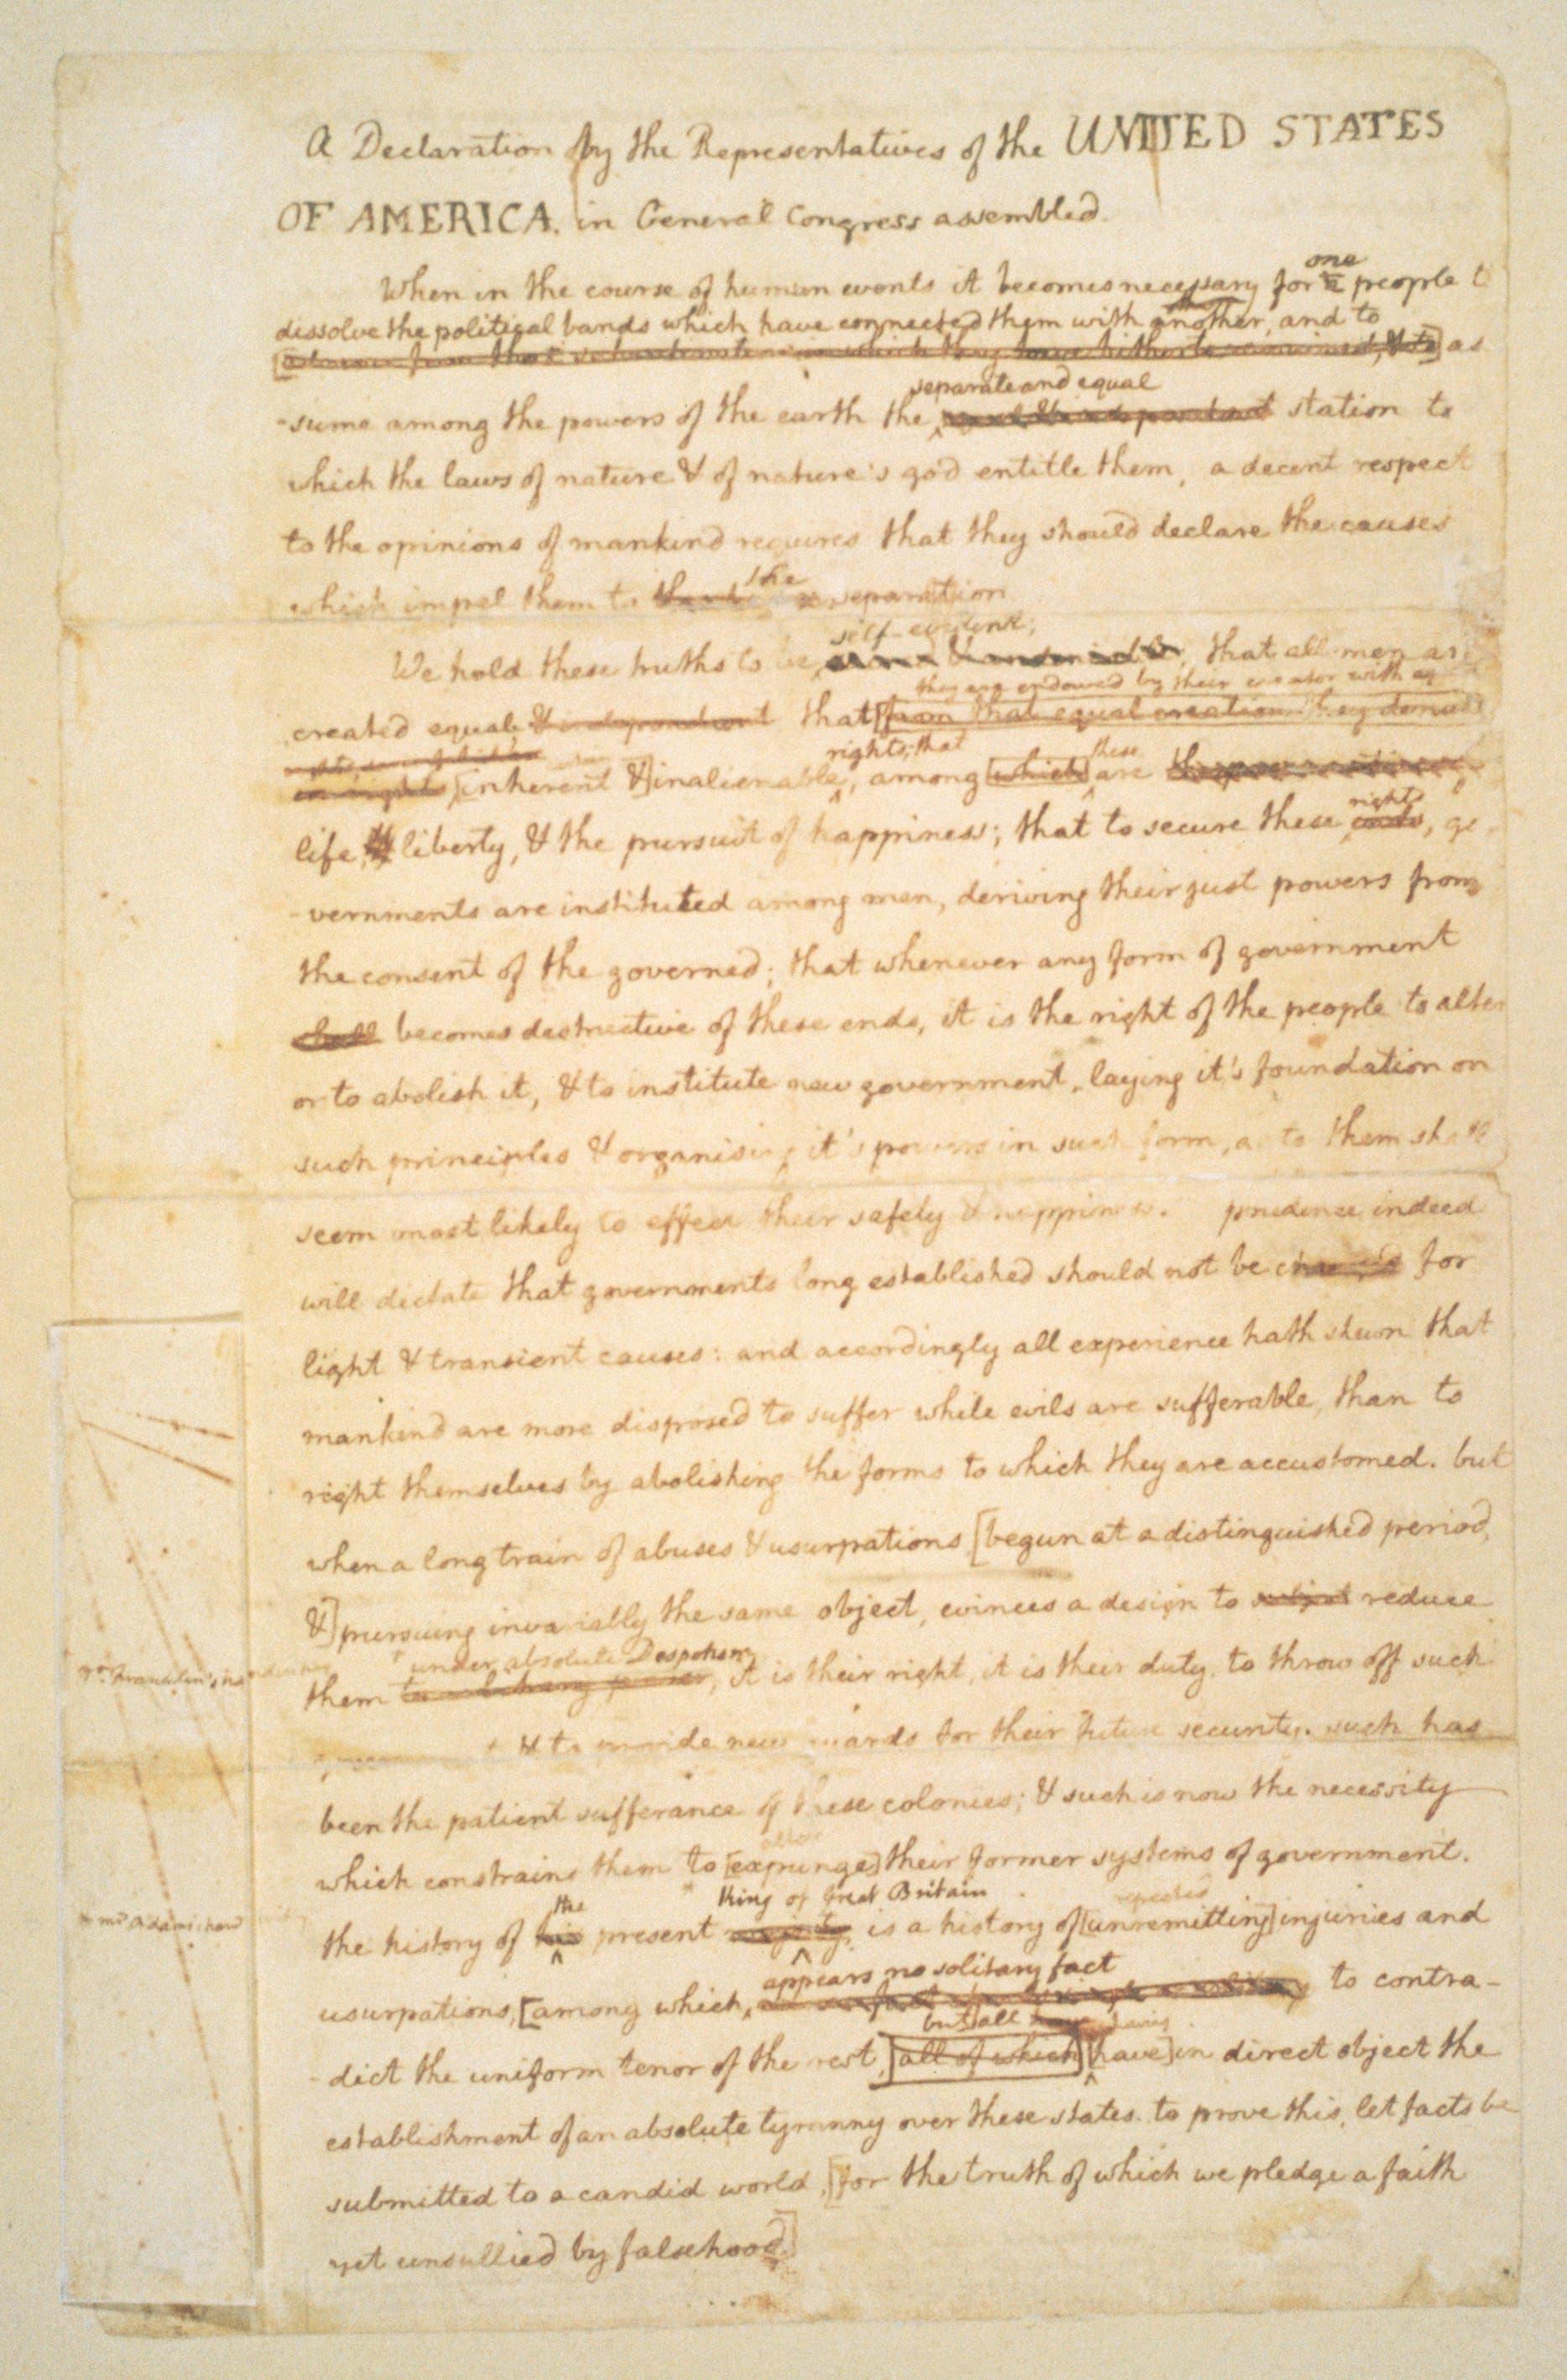 A rough draft of the Declaration of Independence.